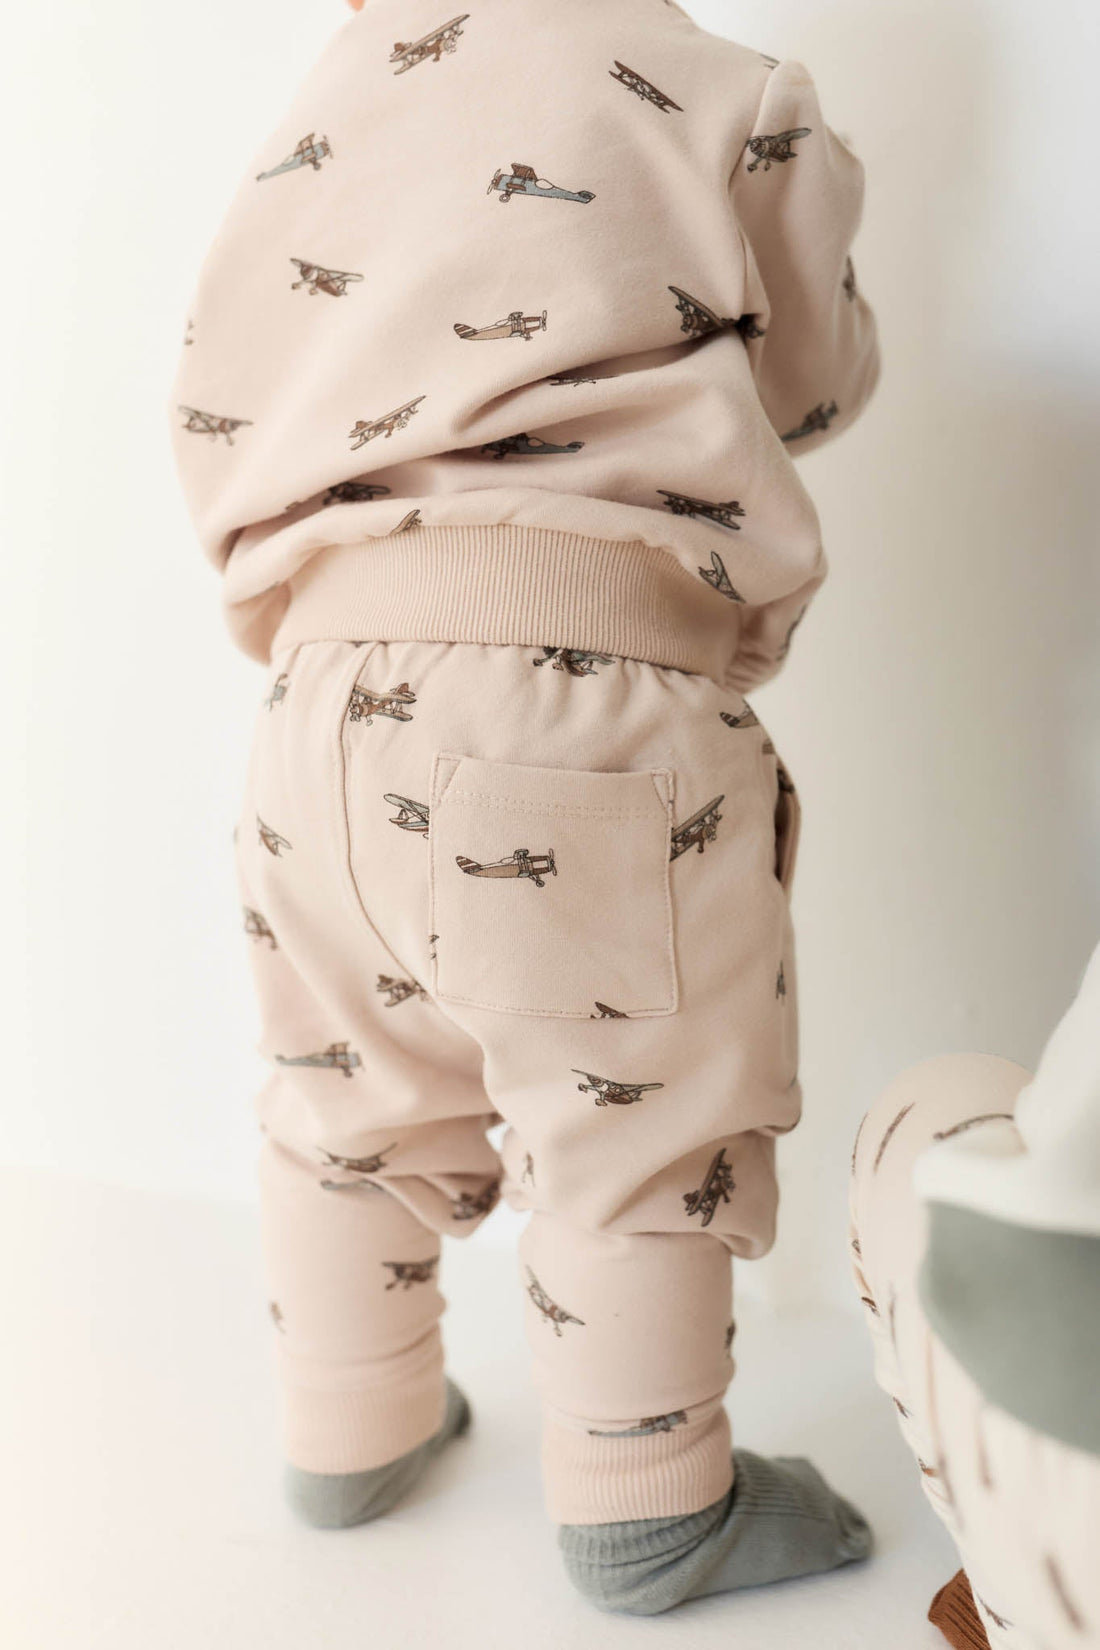 Organic Cotton Jalen Track Pant - Avion Large Shell Childrens Pant from Jamie Kay USA